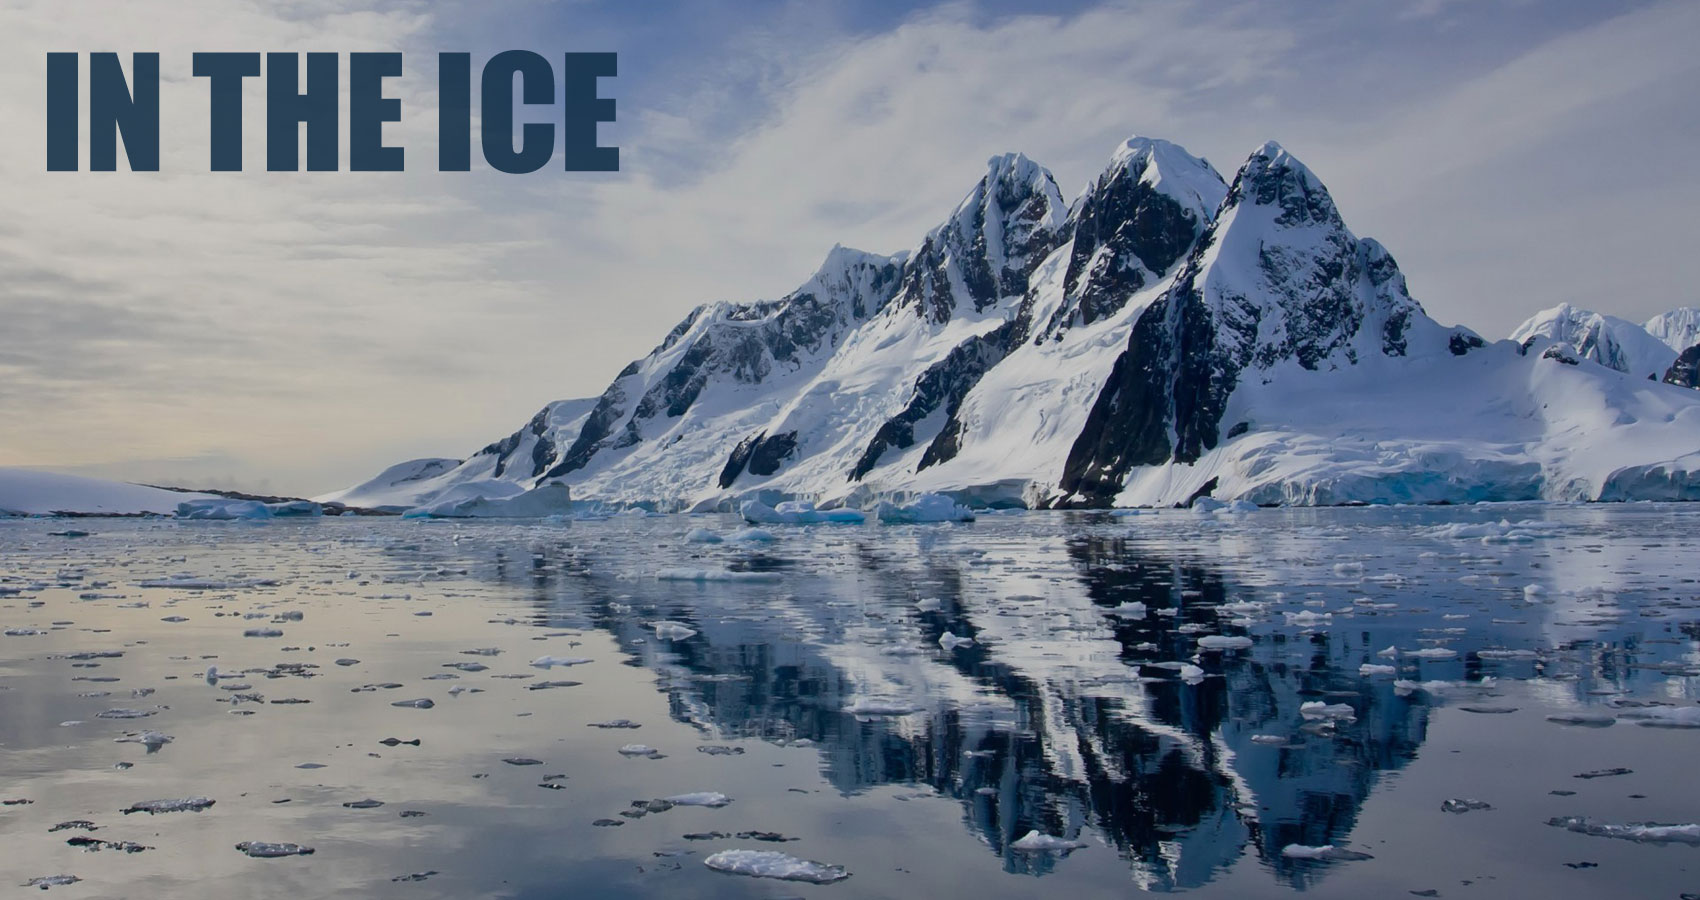 In the Ice written by Daniel S. Liuzzi at Spillwords.com